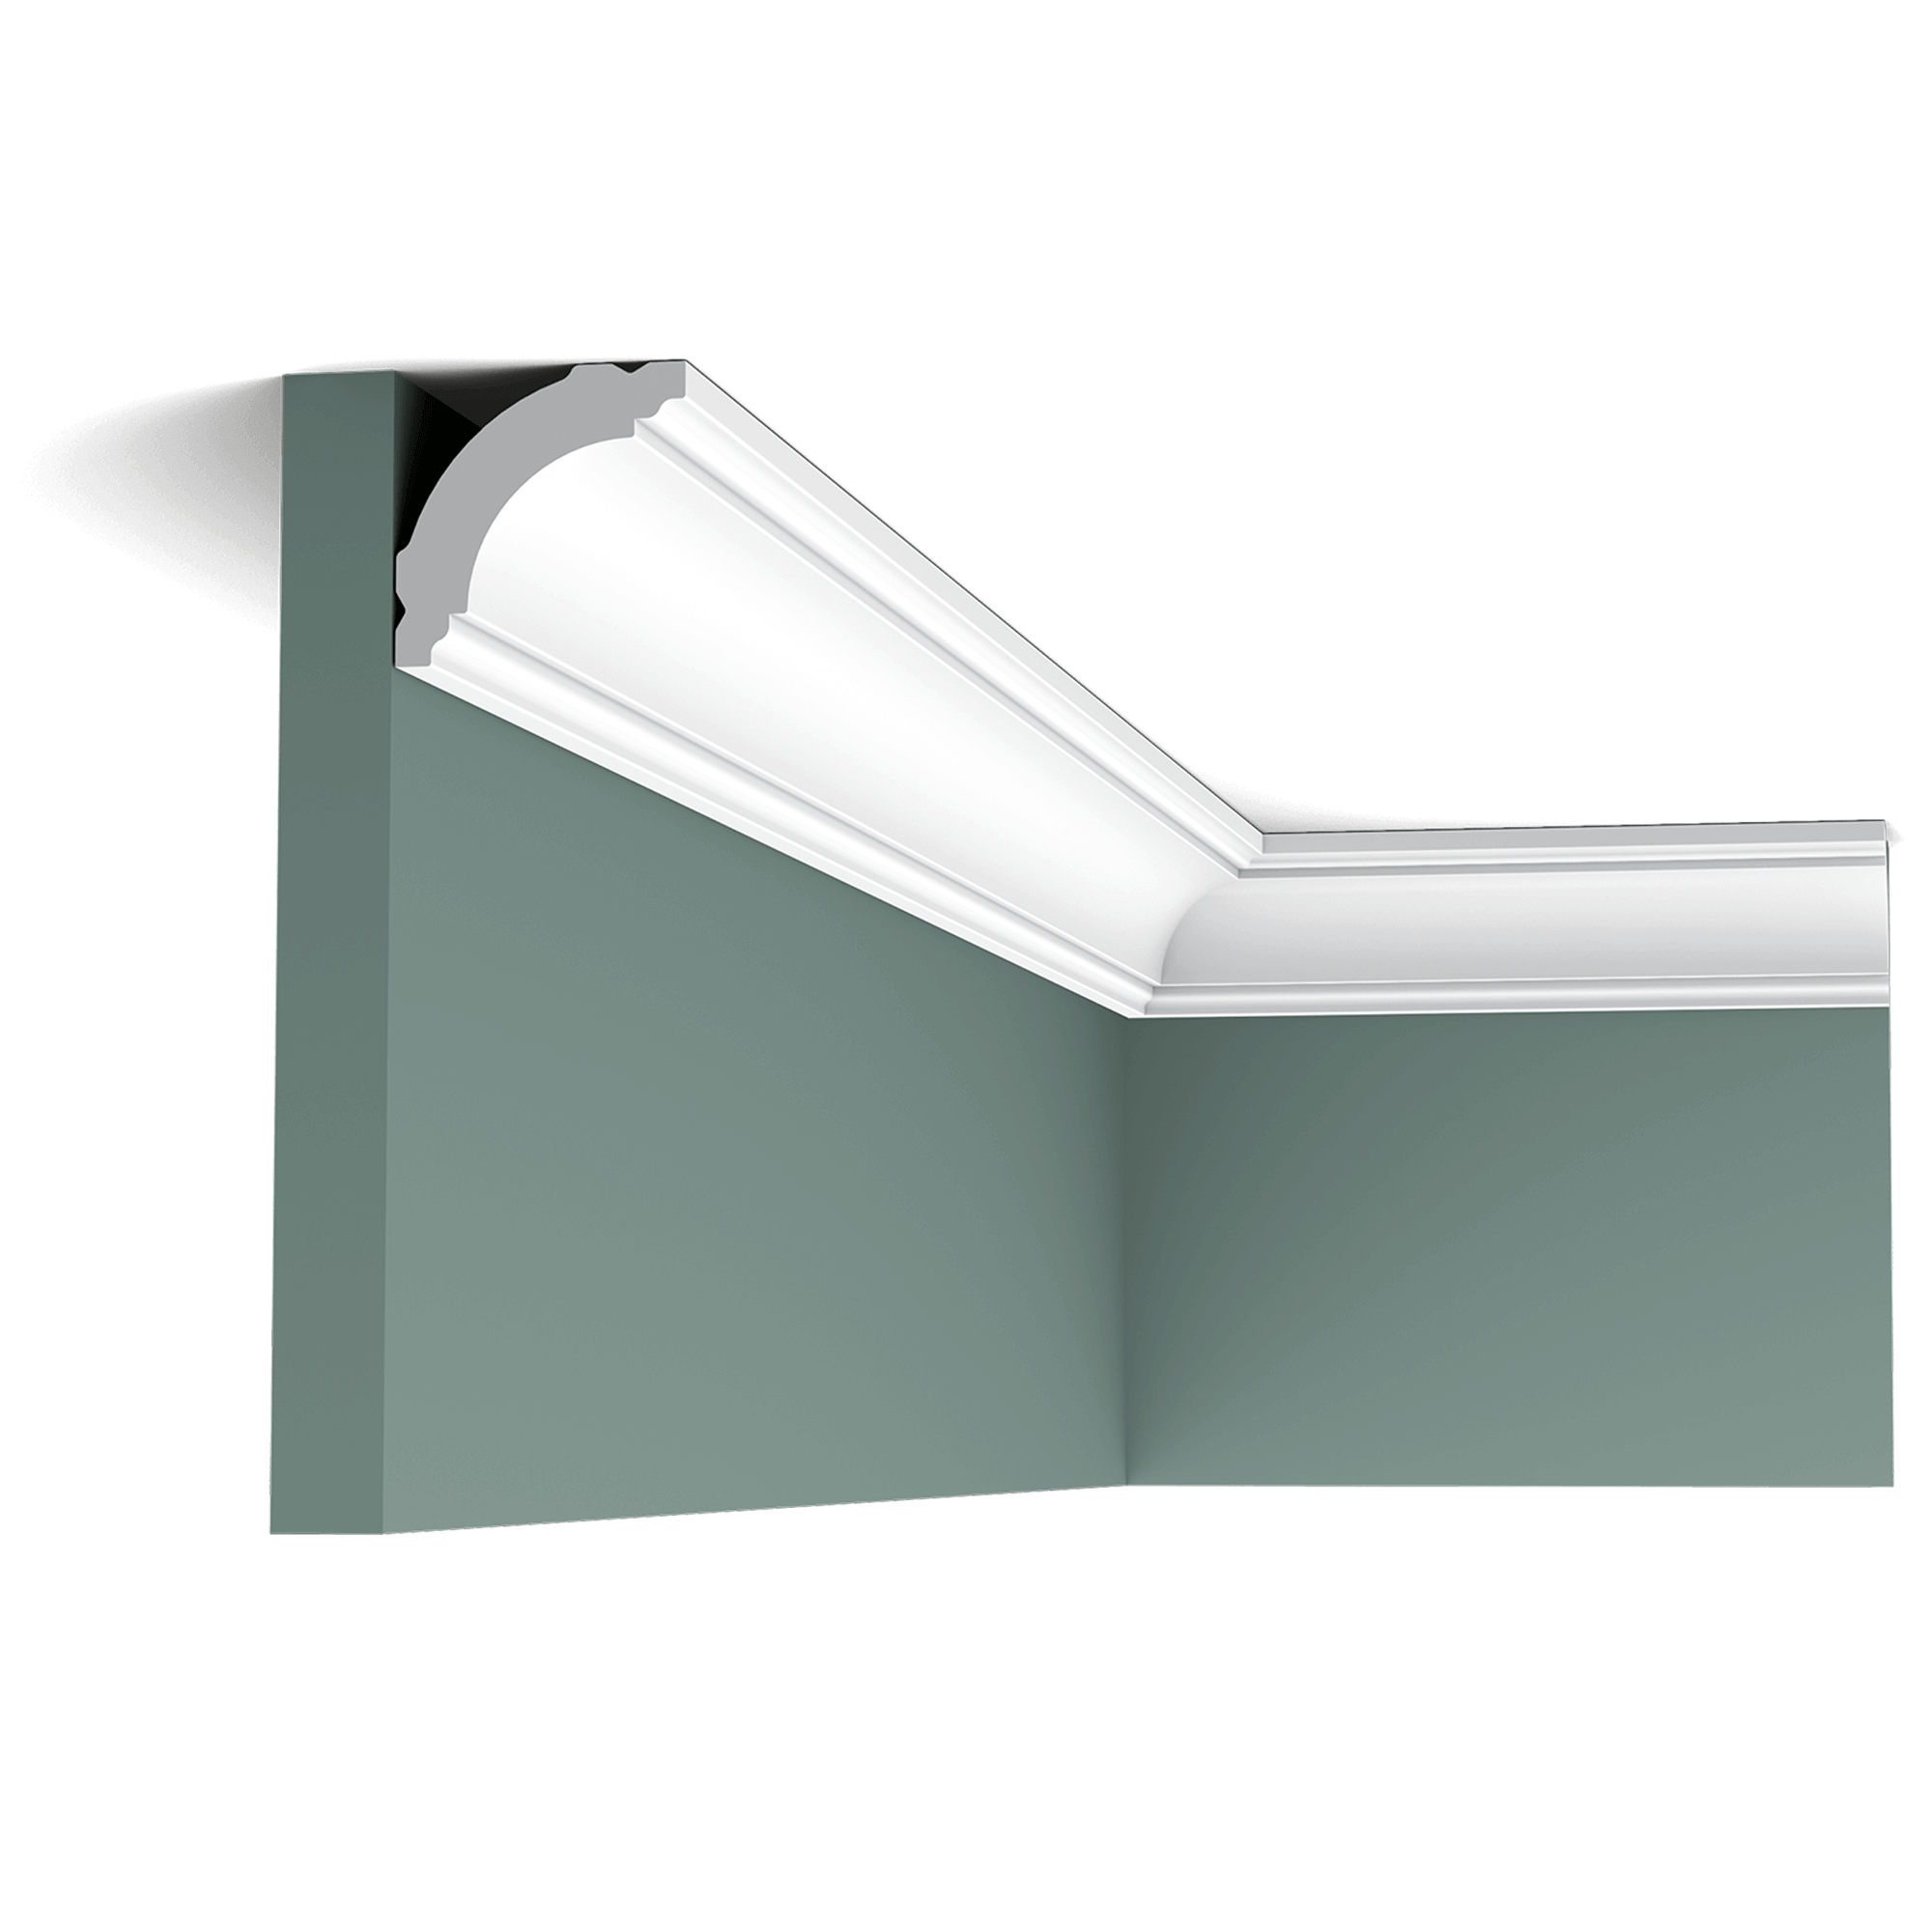 cb510 cornice moulding f224 Classic cornice moulding with linear design above and below.